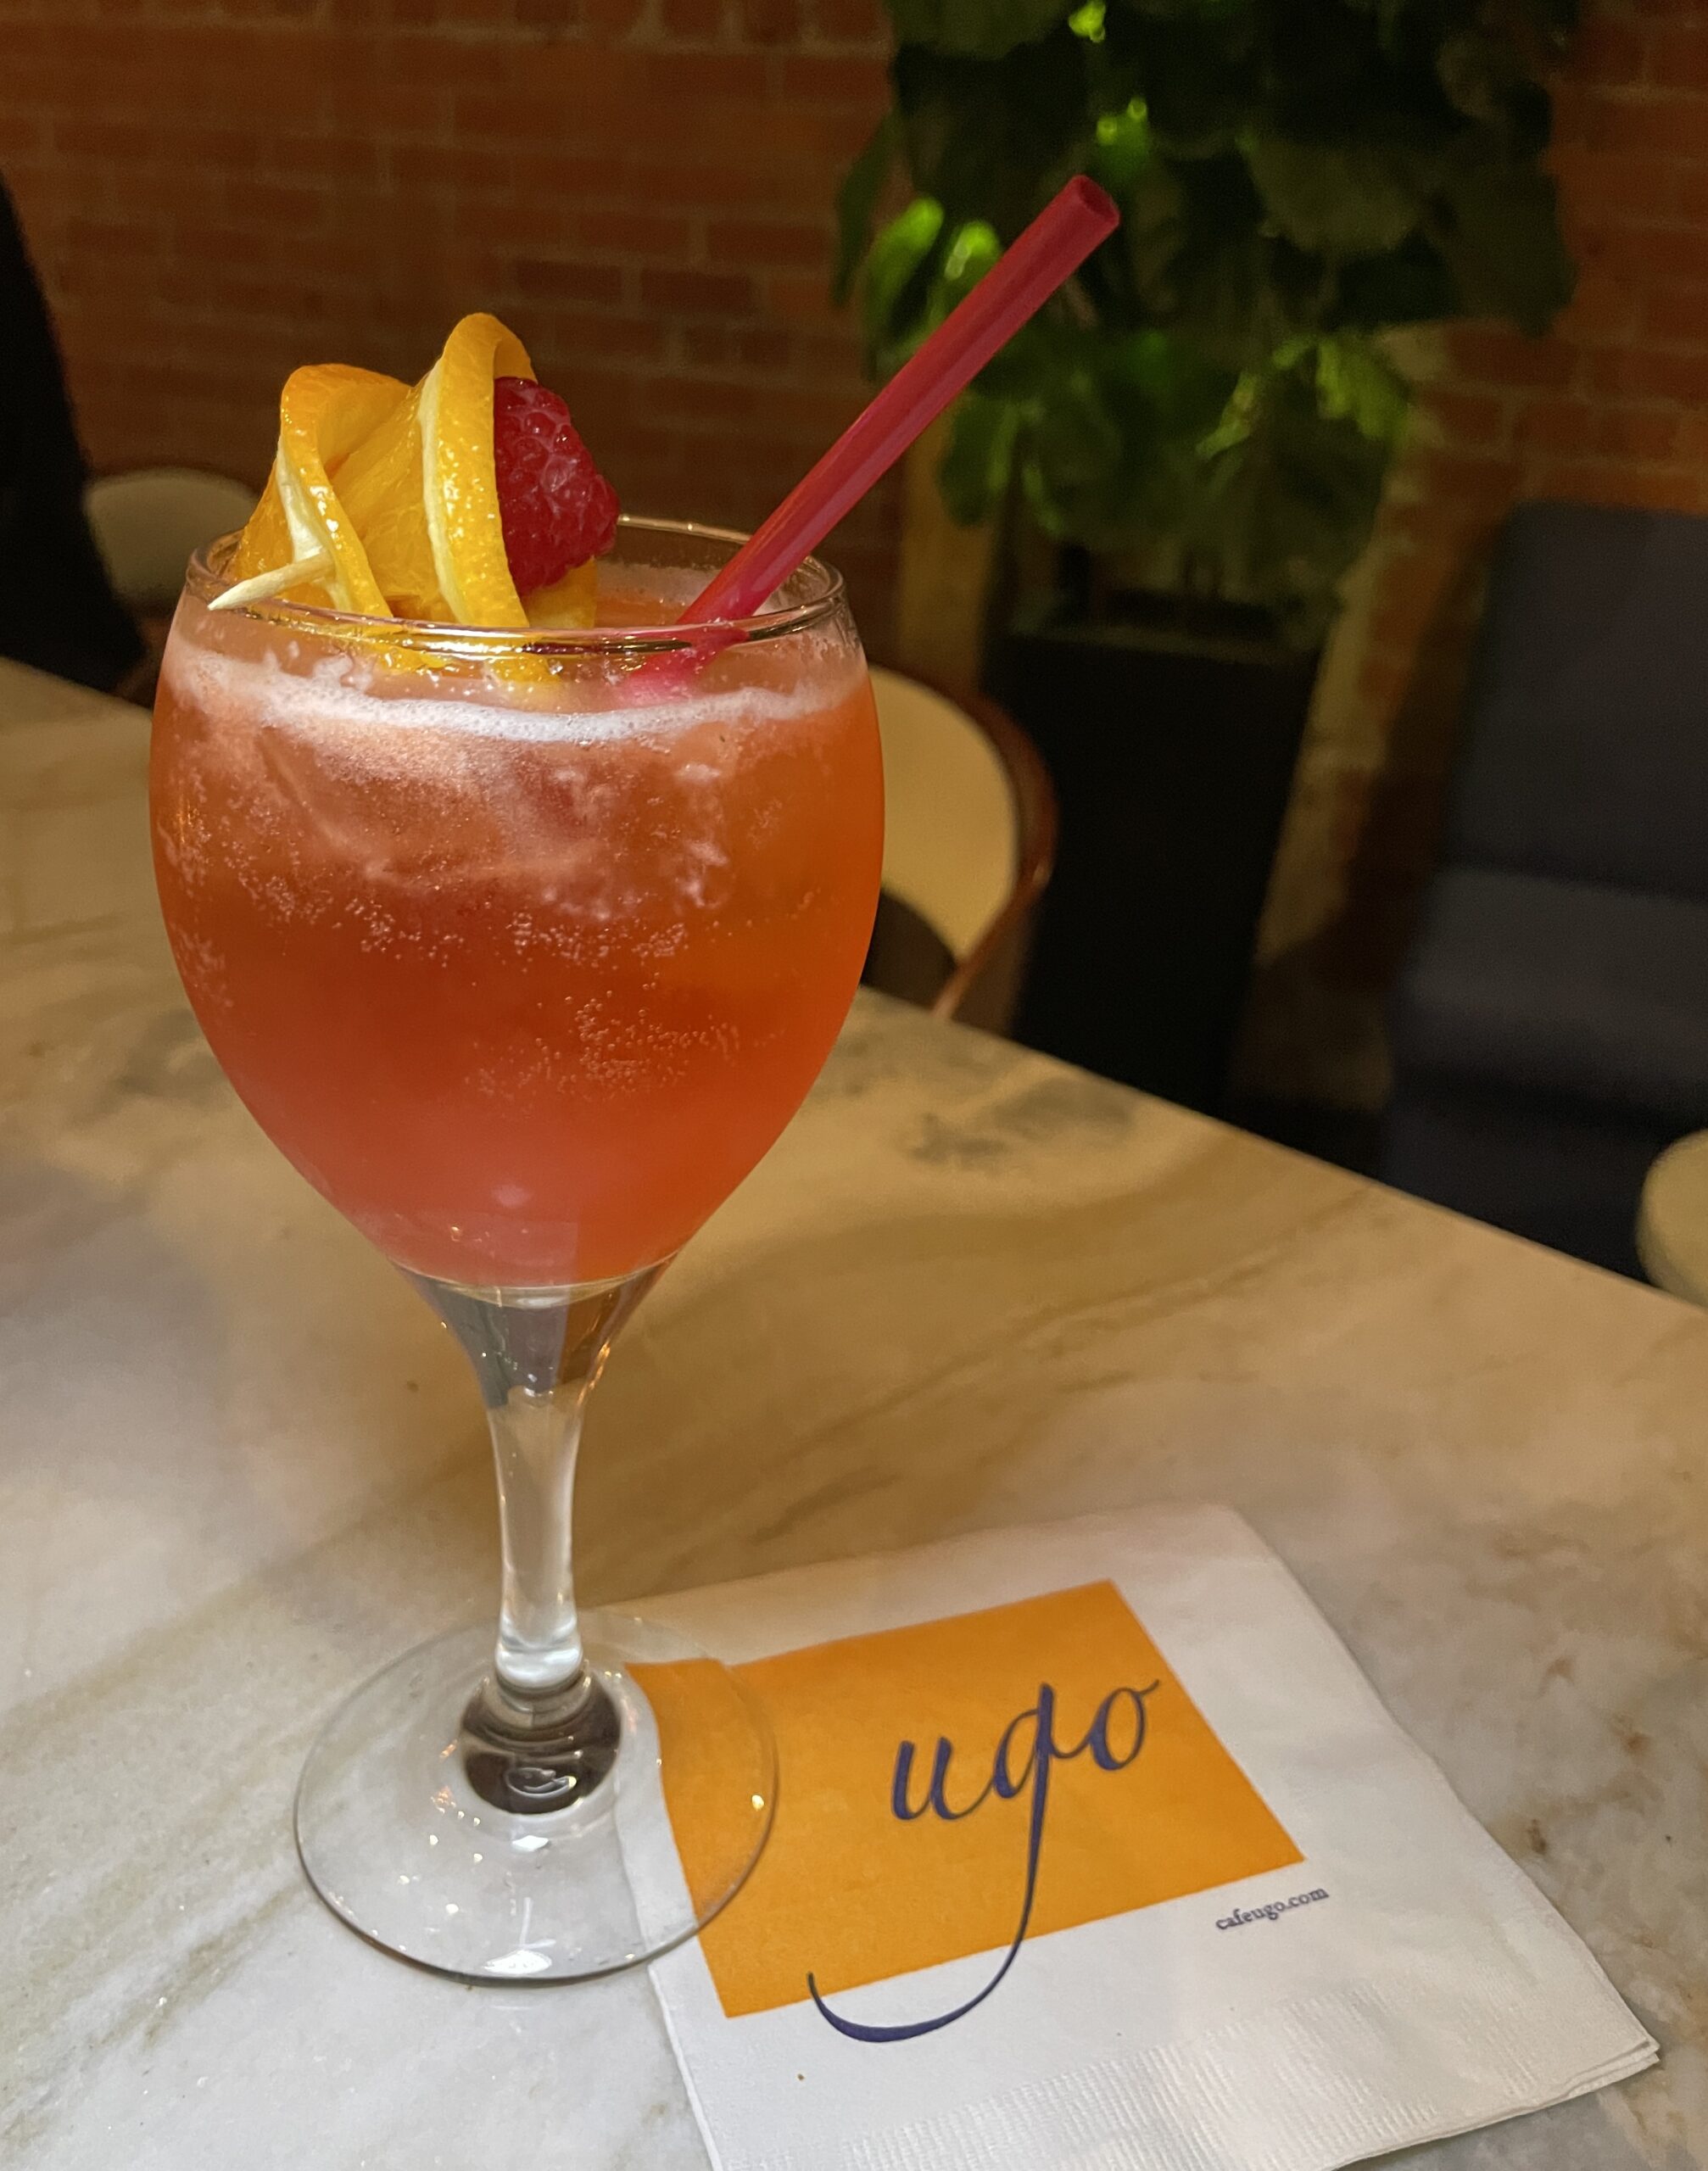 The Lounge at Ugo serves an array of dynamic craft cocktails divided into two categories: Specialty and Classic.